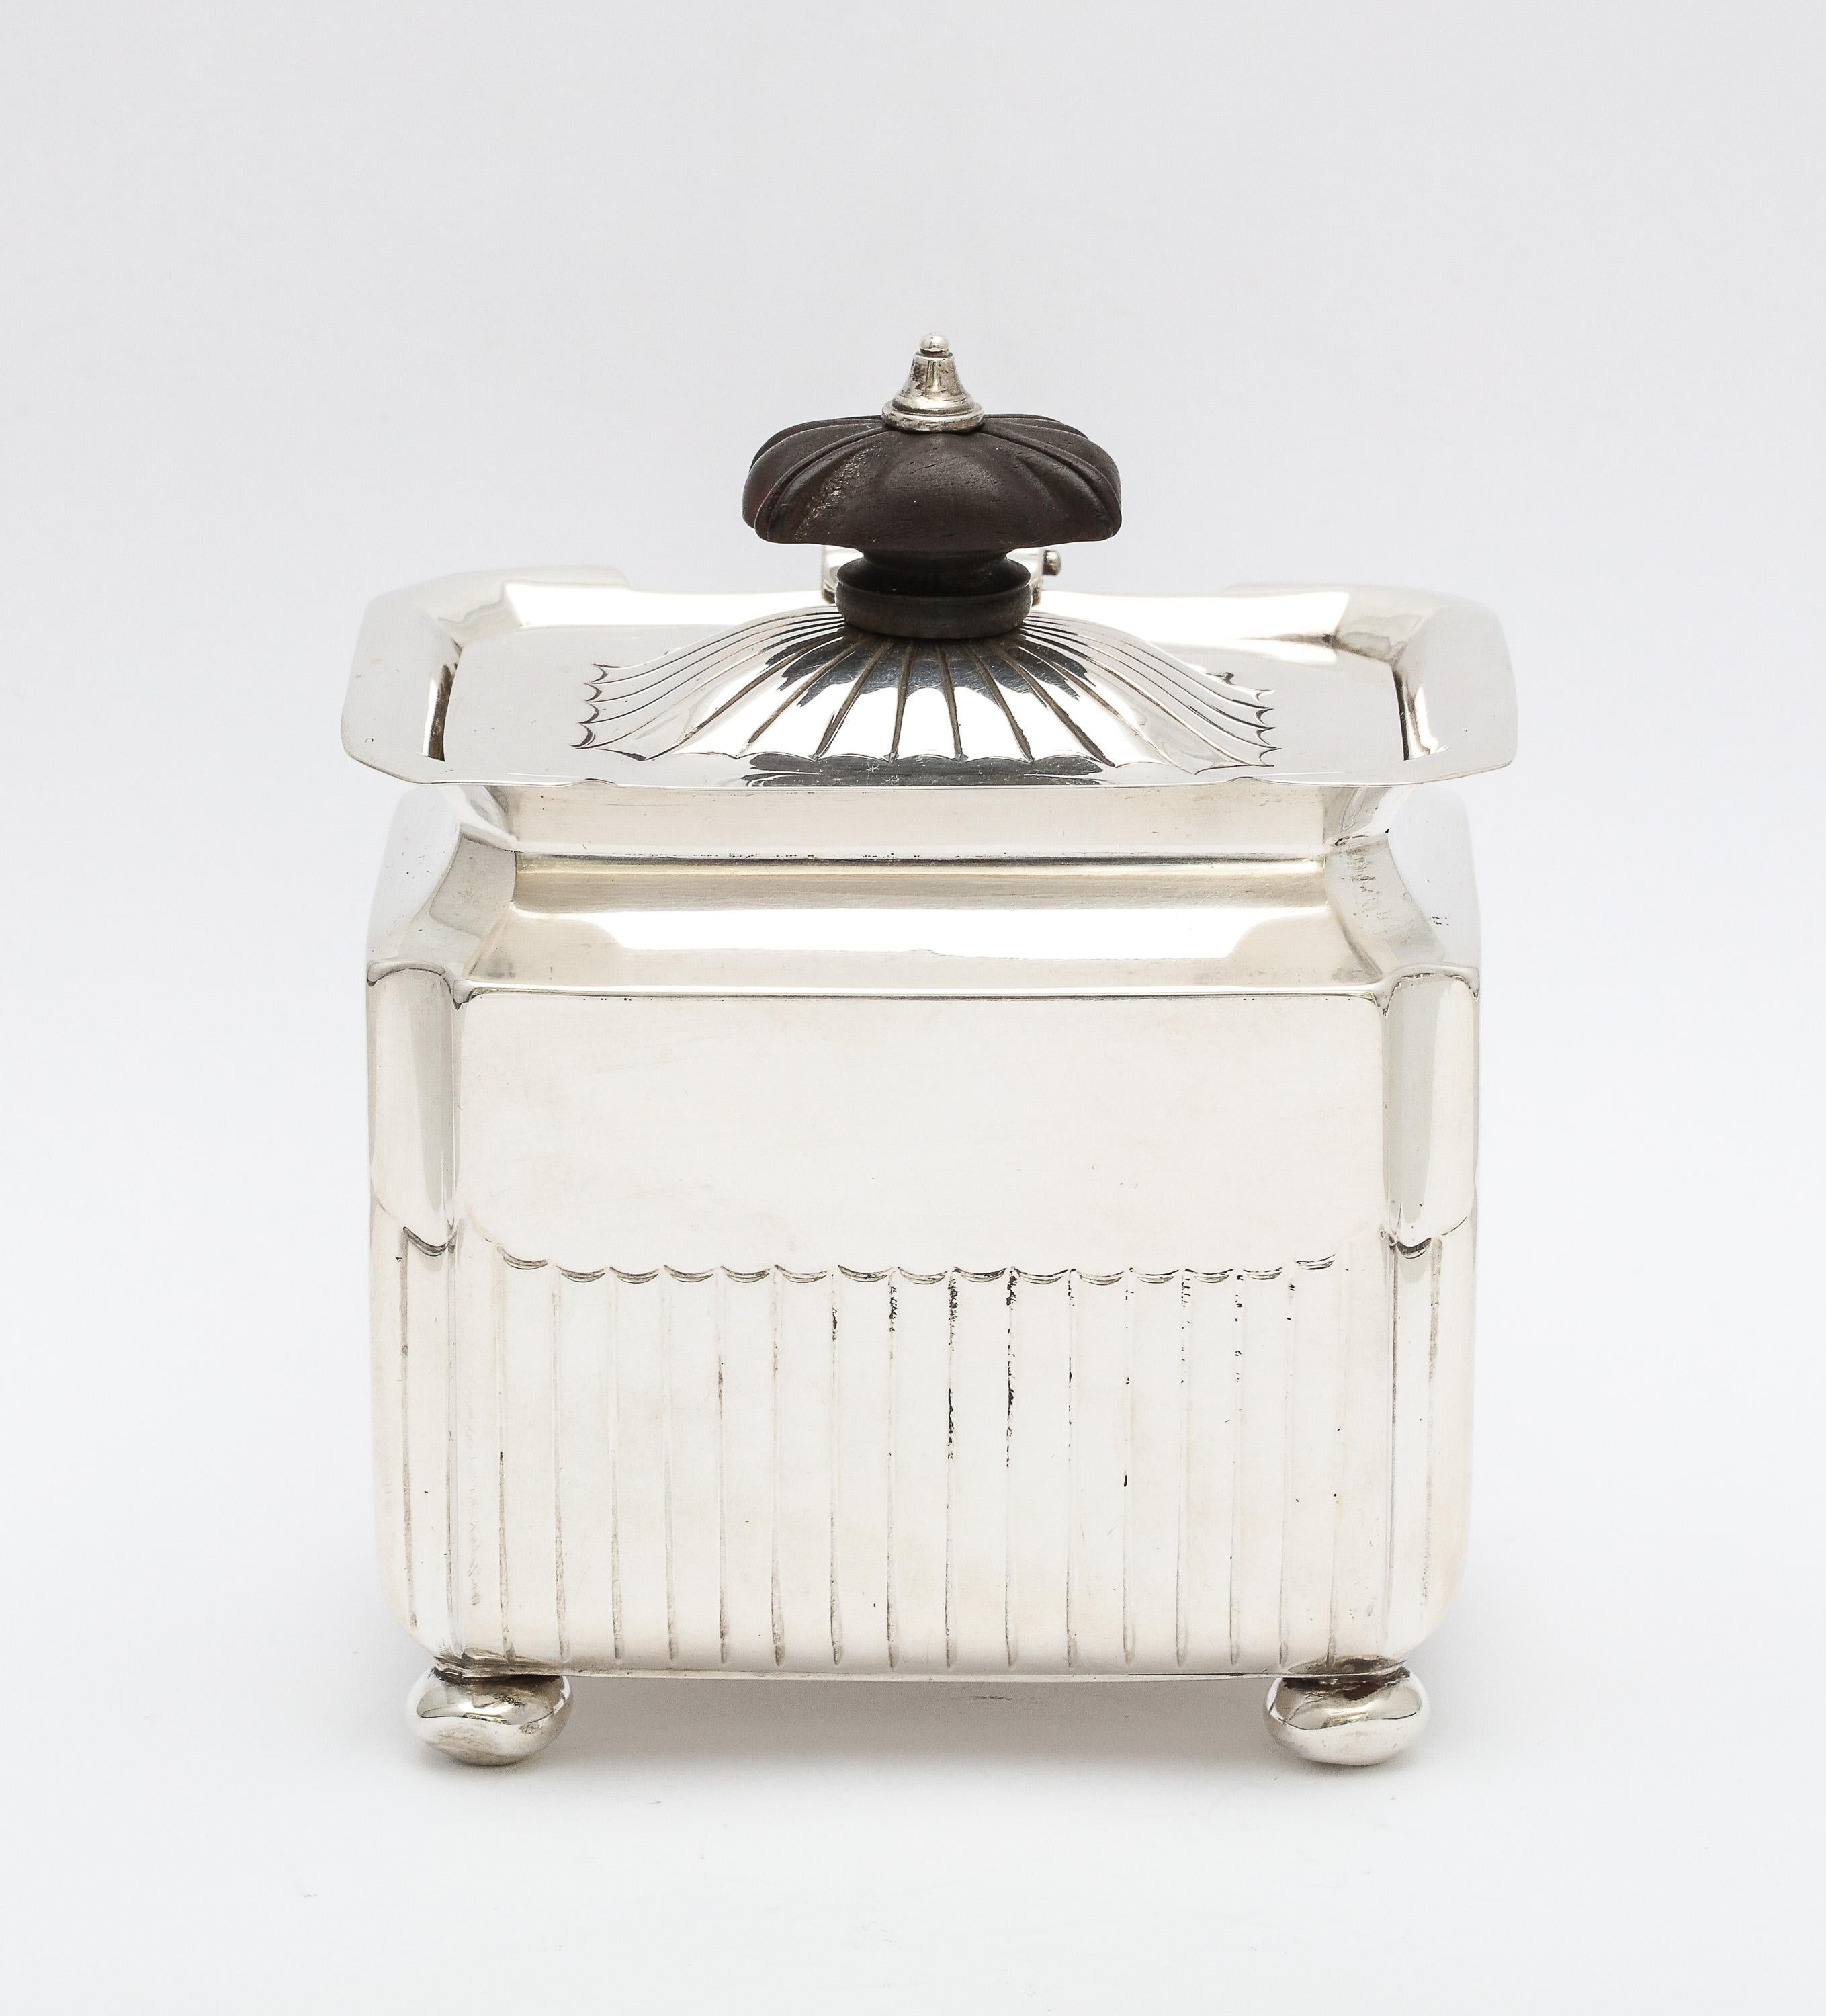 Victorian sterling silver tea caddy with hinged lid, Sheffield, England, year hallmarked for 1890, William Gibson and John Langman (silversmiths for The Goldsmiths and Silversmiths Co. in London) - makers. Measures 4 1/4 inches high (to top of